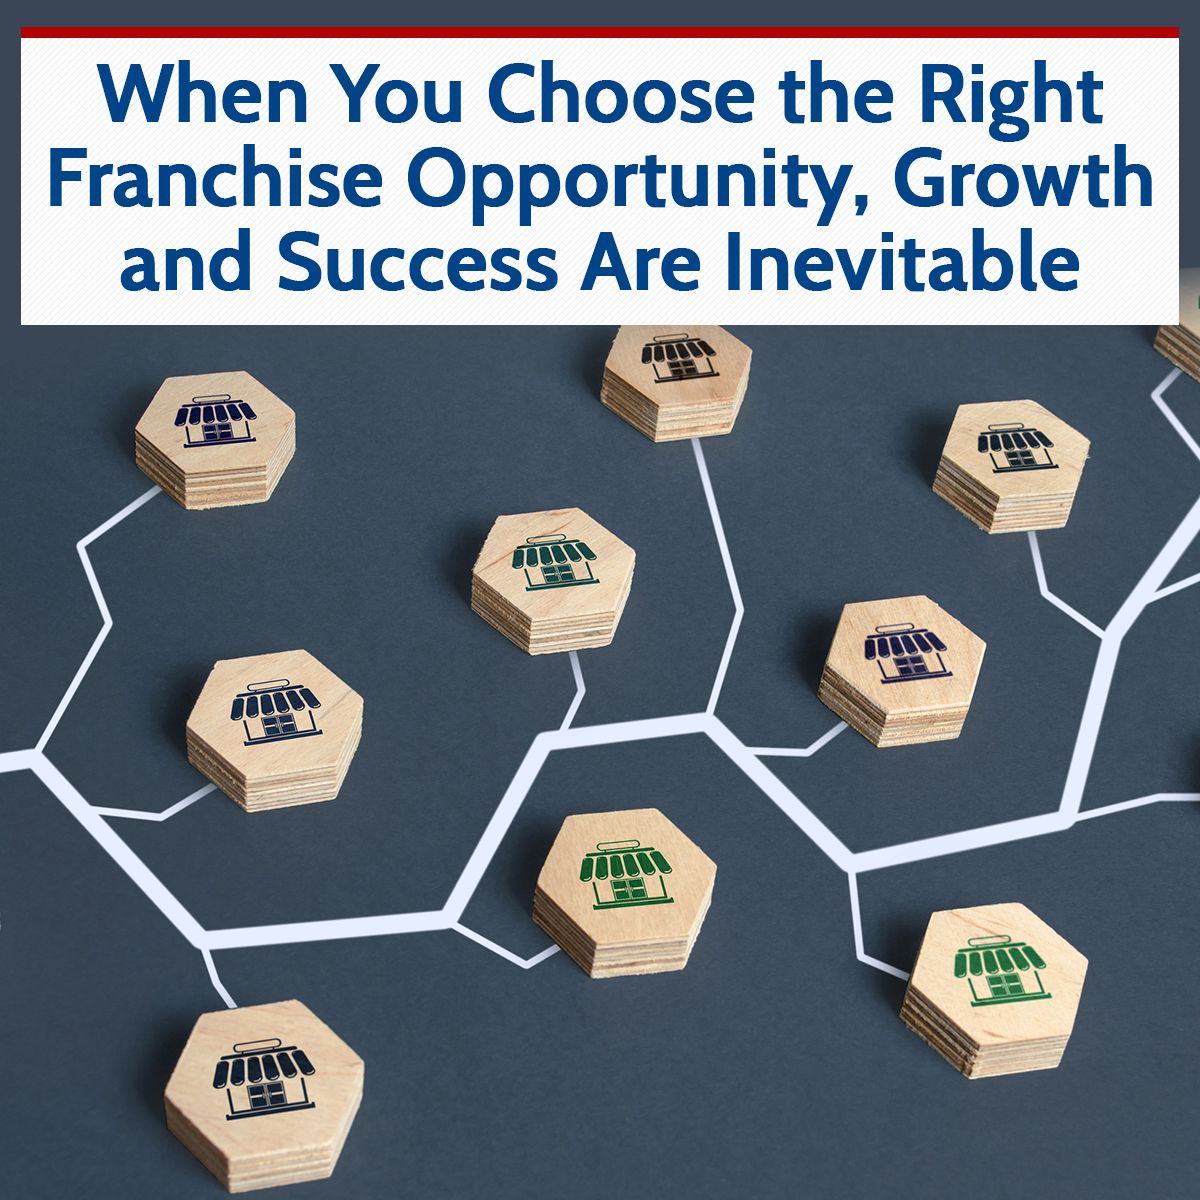 When You Choose the Right Franchise Opportunity, Growth and Success Are Inevitable